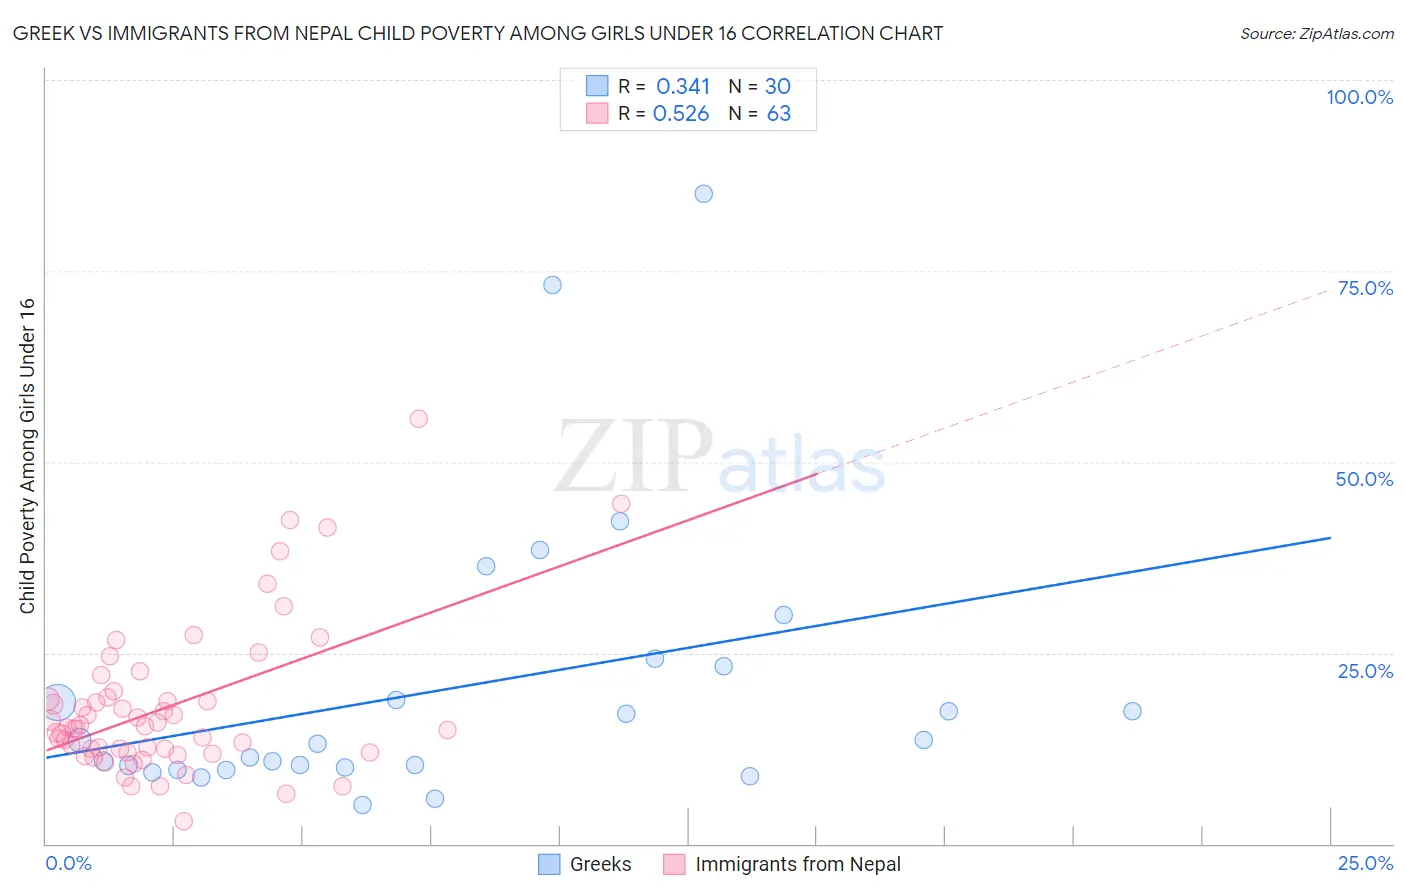 Greek vs Immigrants from Nepal Child Poverty Among Girls Under 16